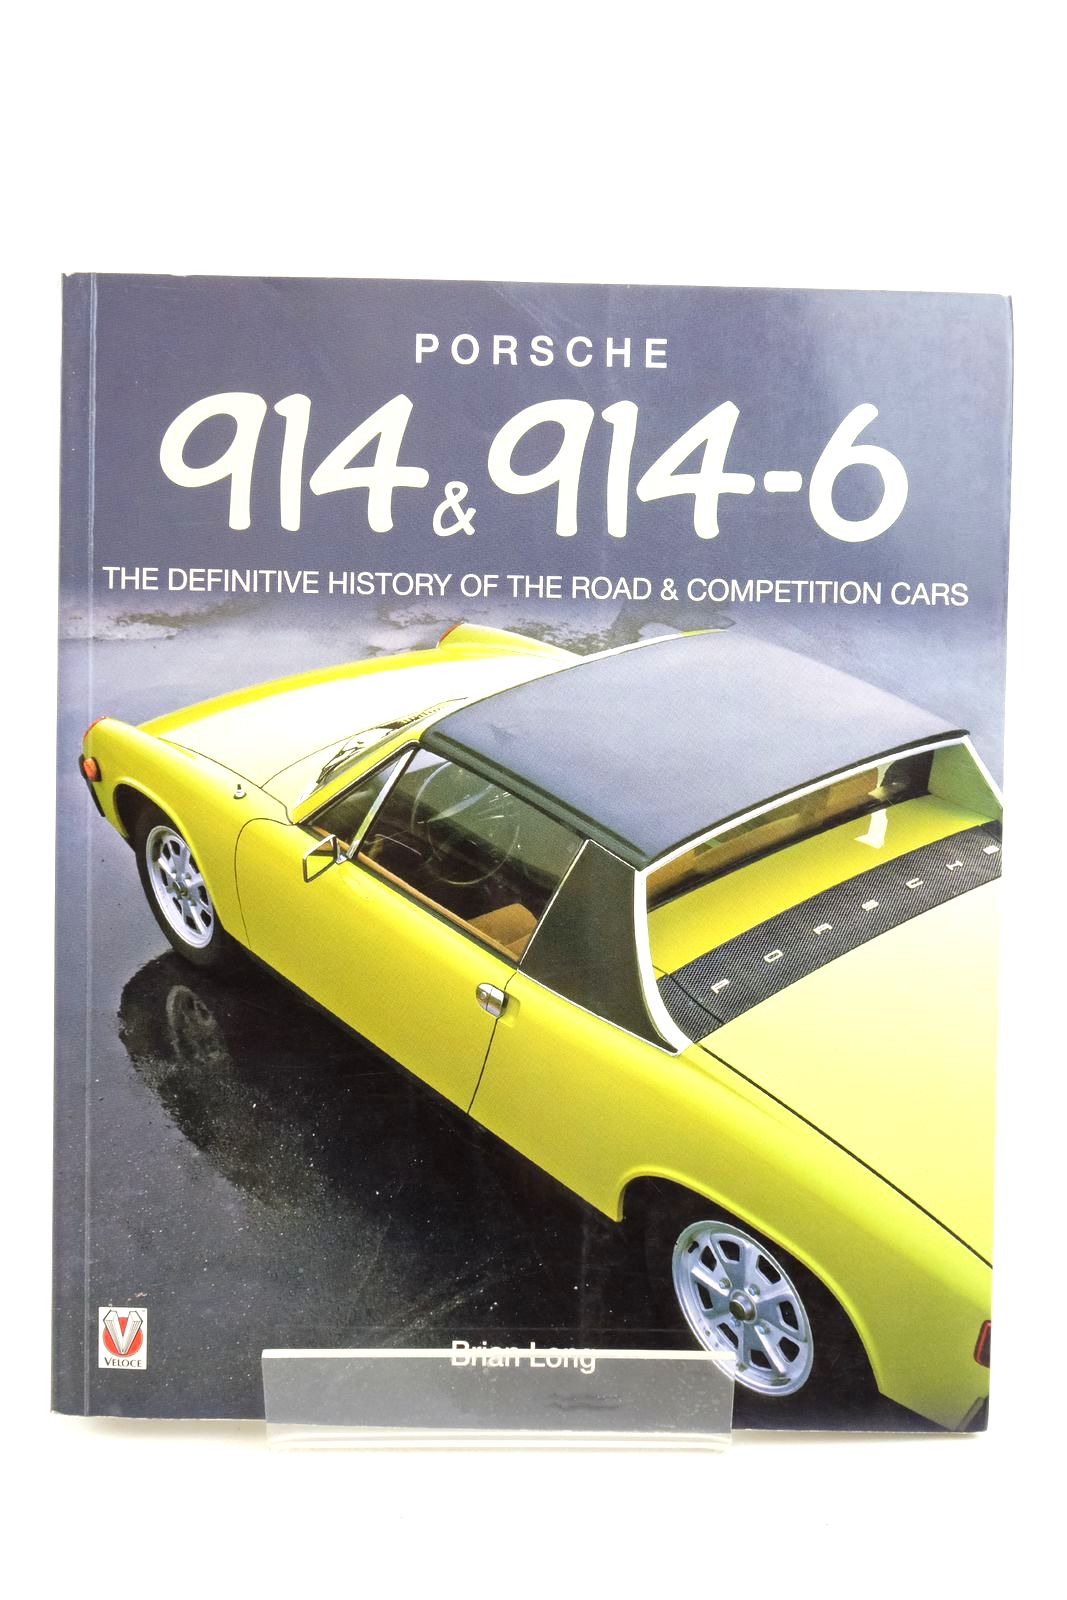 Photo of PORSCHE 914 & 914-6: THE DEFINITIVE HISTORY OF THE ROAD & COMPETITION CARS- Stock Number: 2137802